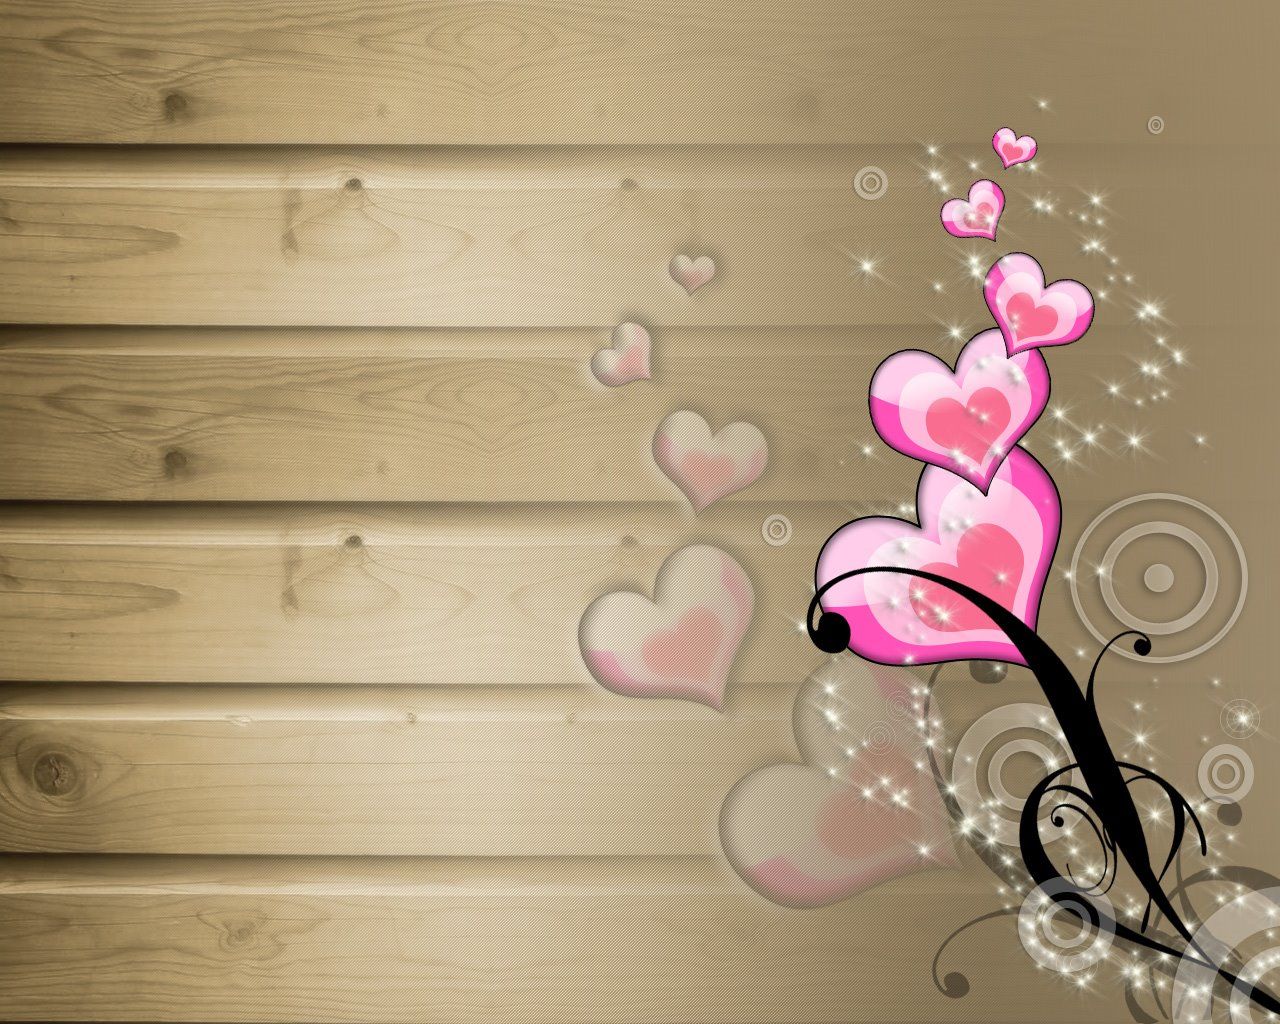 Heart Backgrounds Wallpapers - Wallpaper Cave